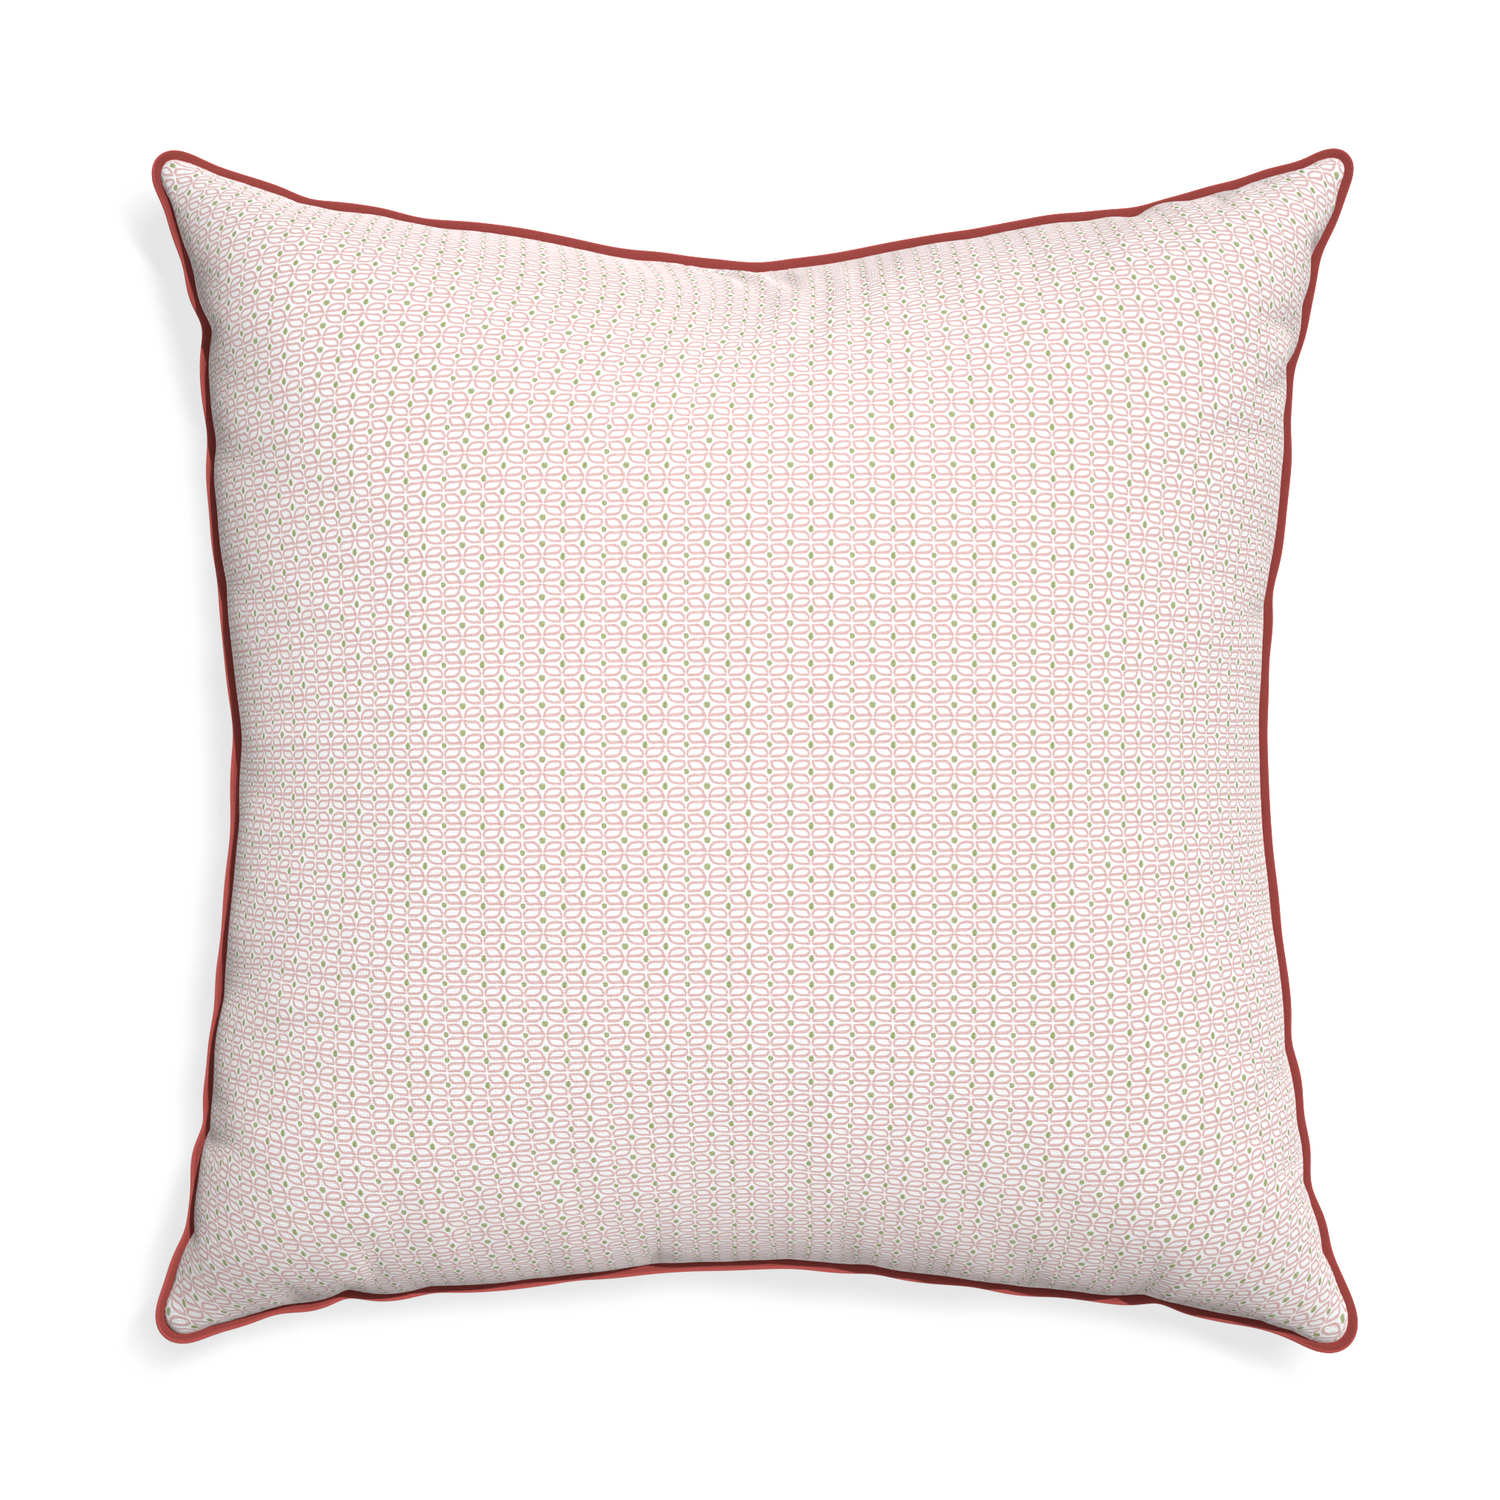 Euro-sham loomi pink custom pillow with c piping on white background